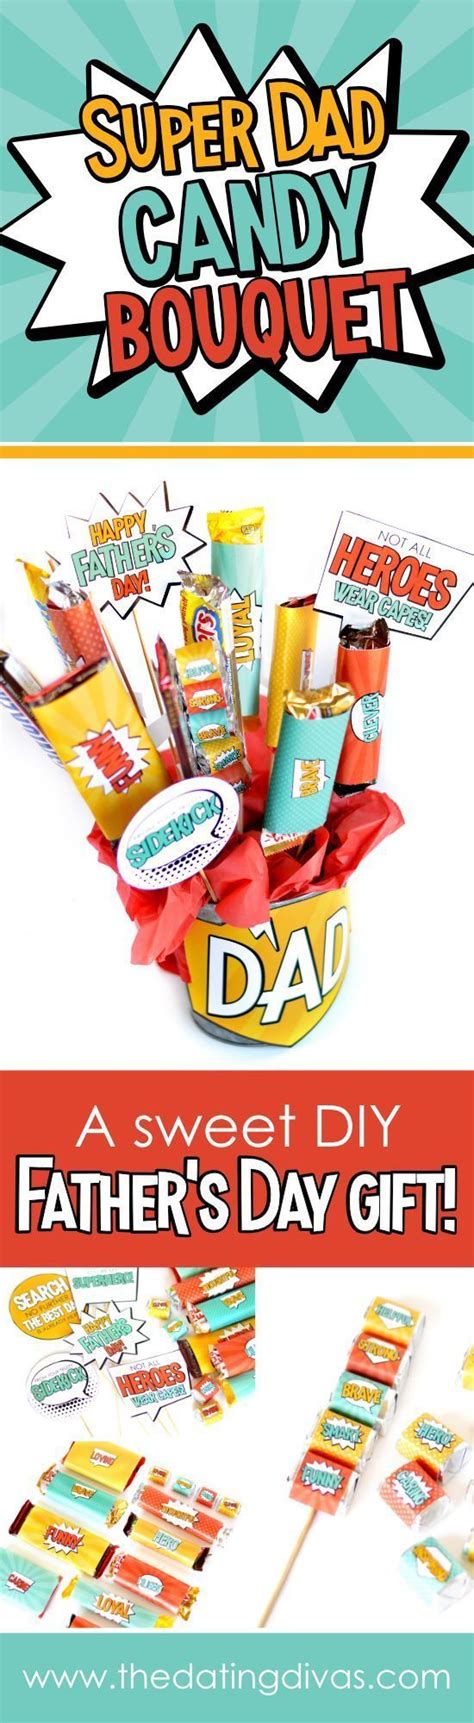 See more ideas about homemade fathers day gifts, fathers day gifts, fathers day. Superhero Father's Day Gift Ideas | Fathers day gift ...